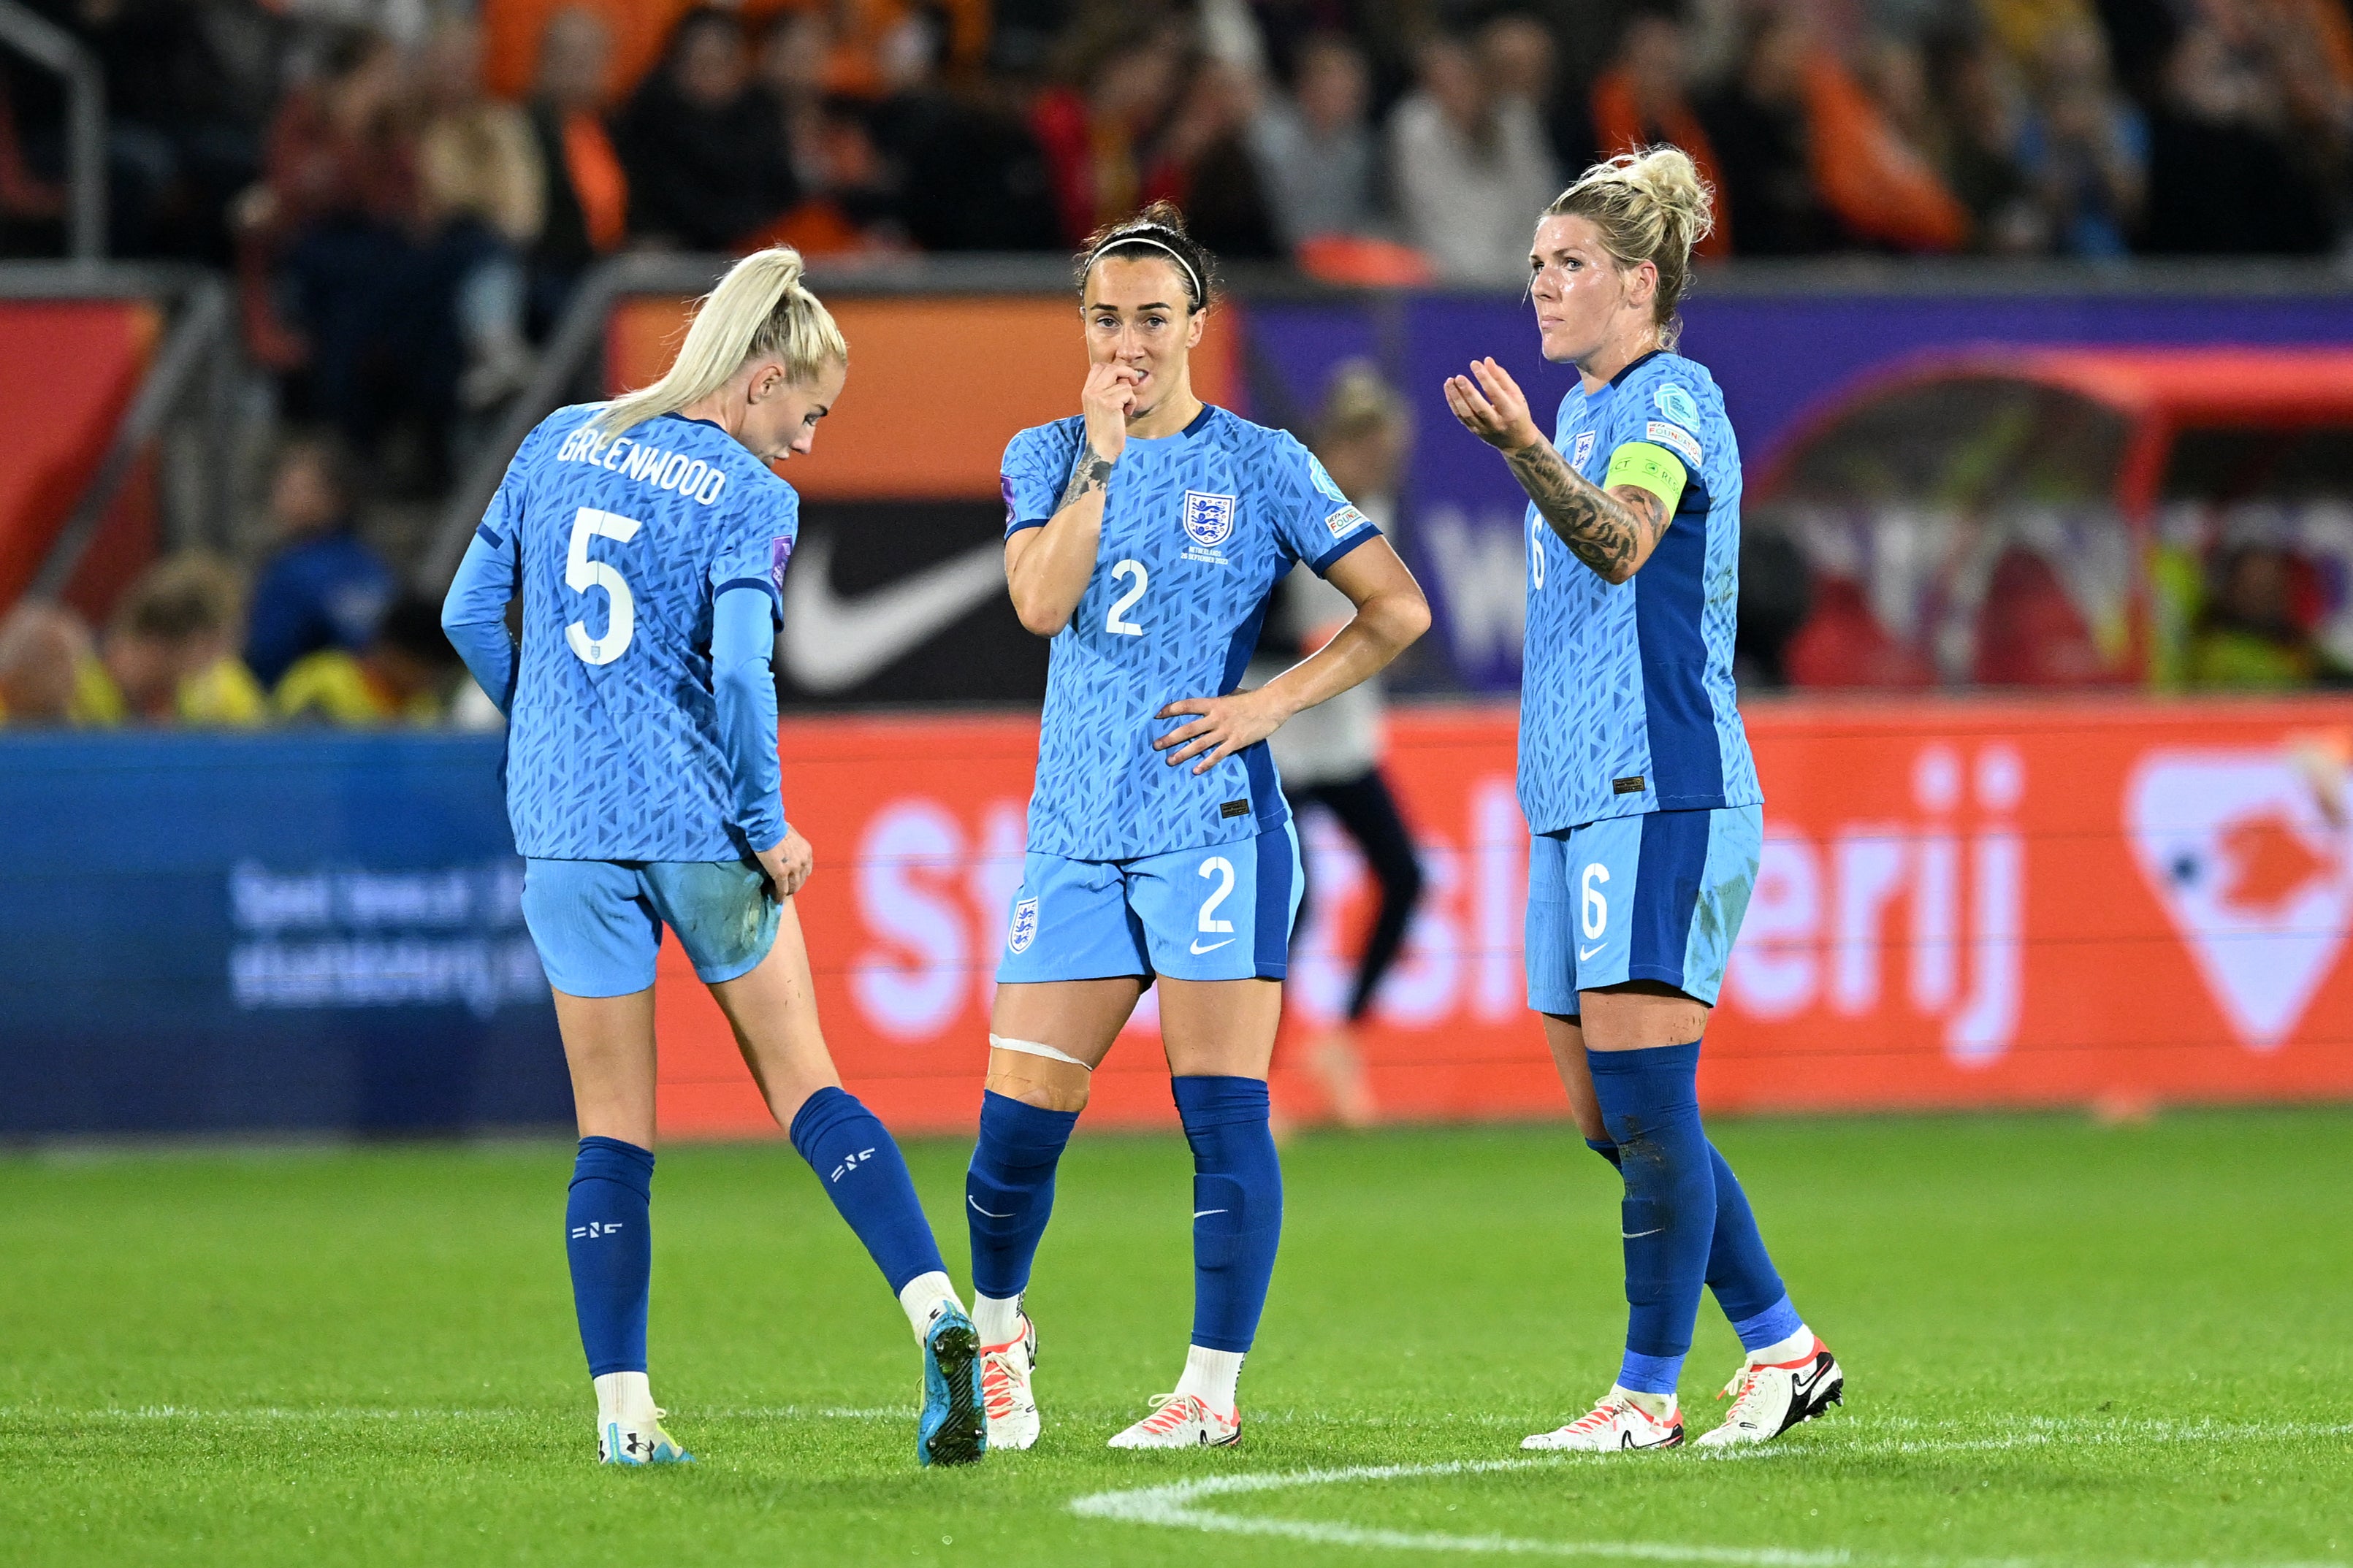 England suffered a 2-1 defeat to the Netherlands